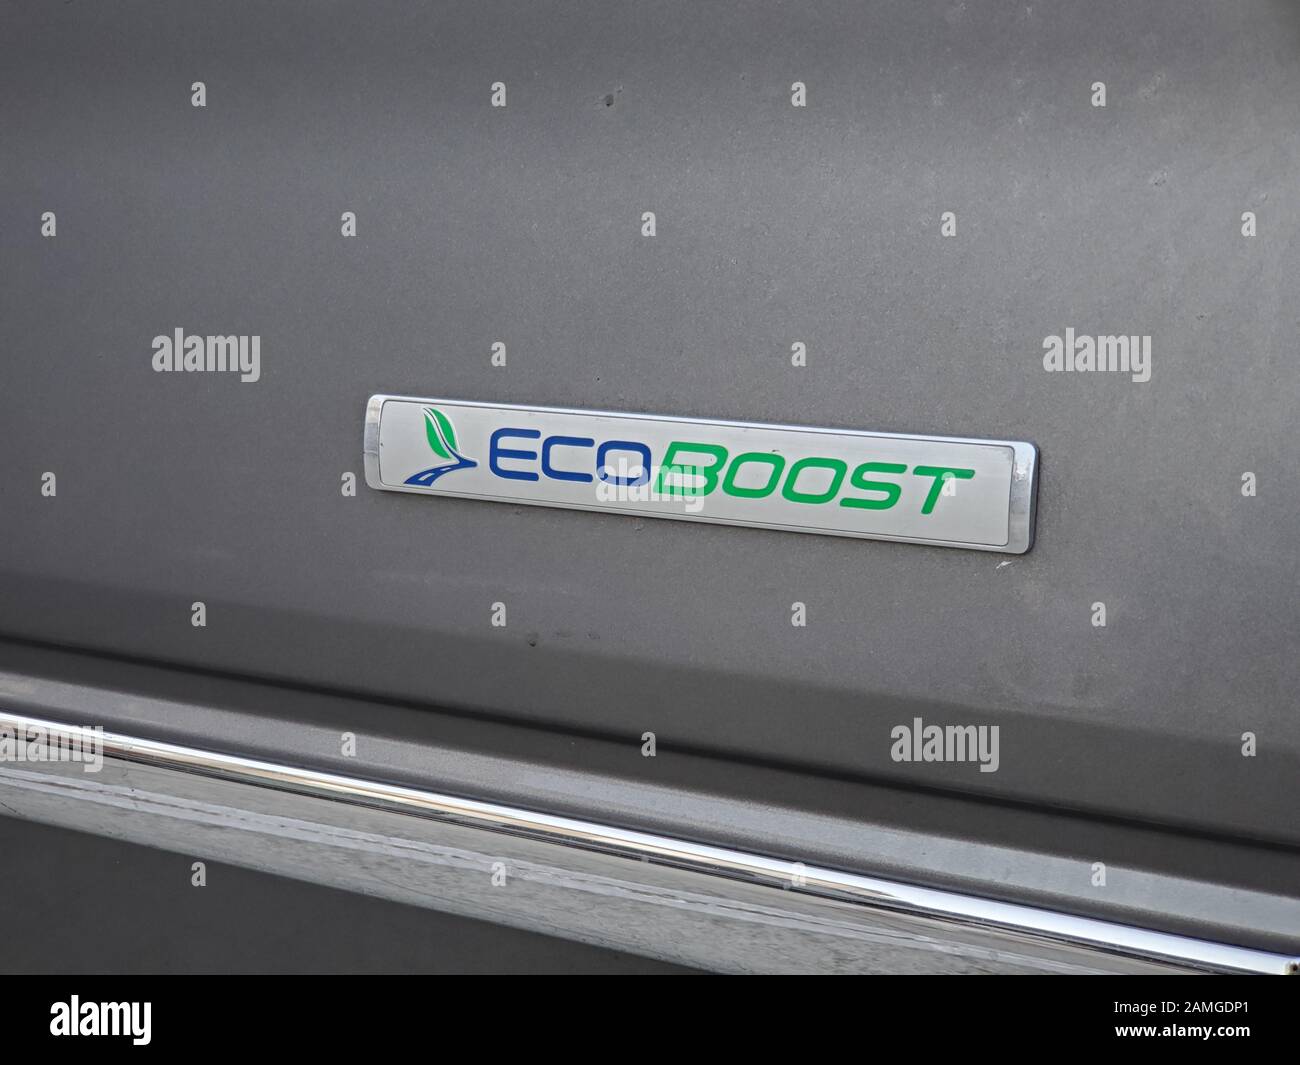 Close-up of logo for Ecoboost internal combustion engine system from Ford Motor Company, on a vehicle in San Ramon, California, November 22, 2019. The Ecoboost system is intended to reduce emissions without the use of hybrid electric technologies. () Stock Photo